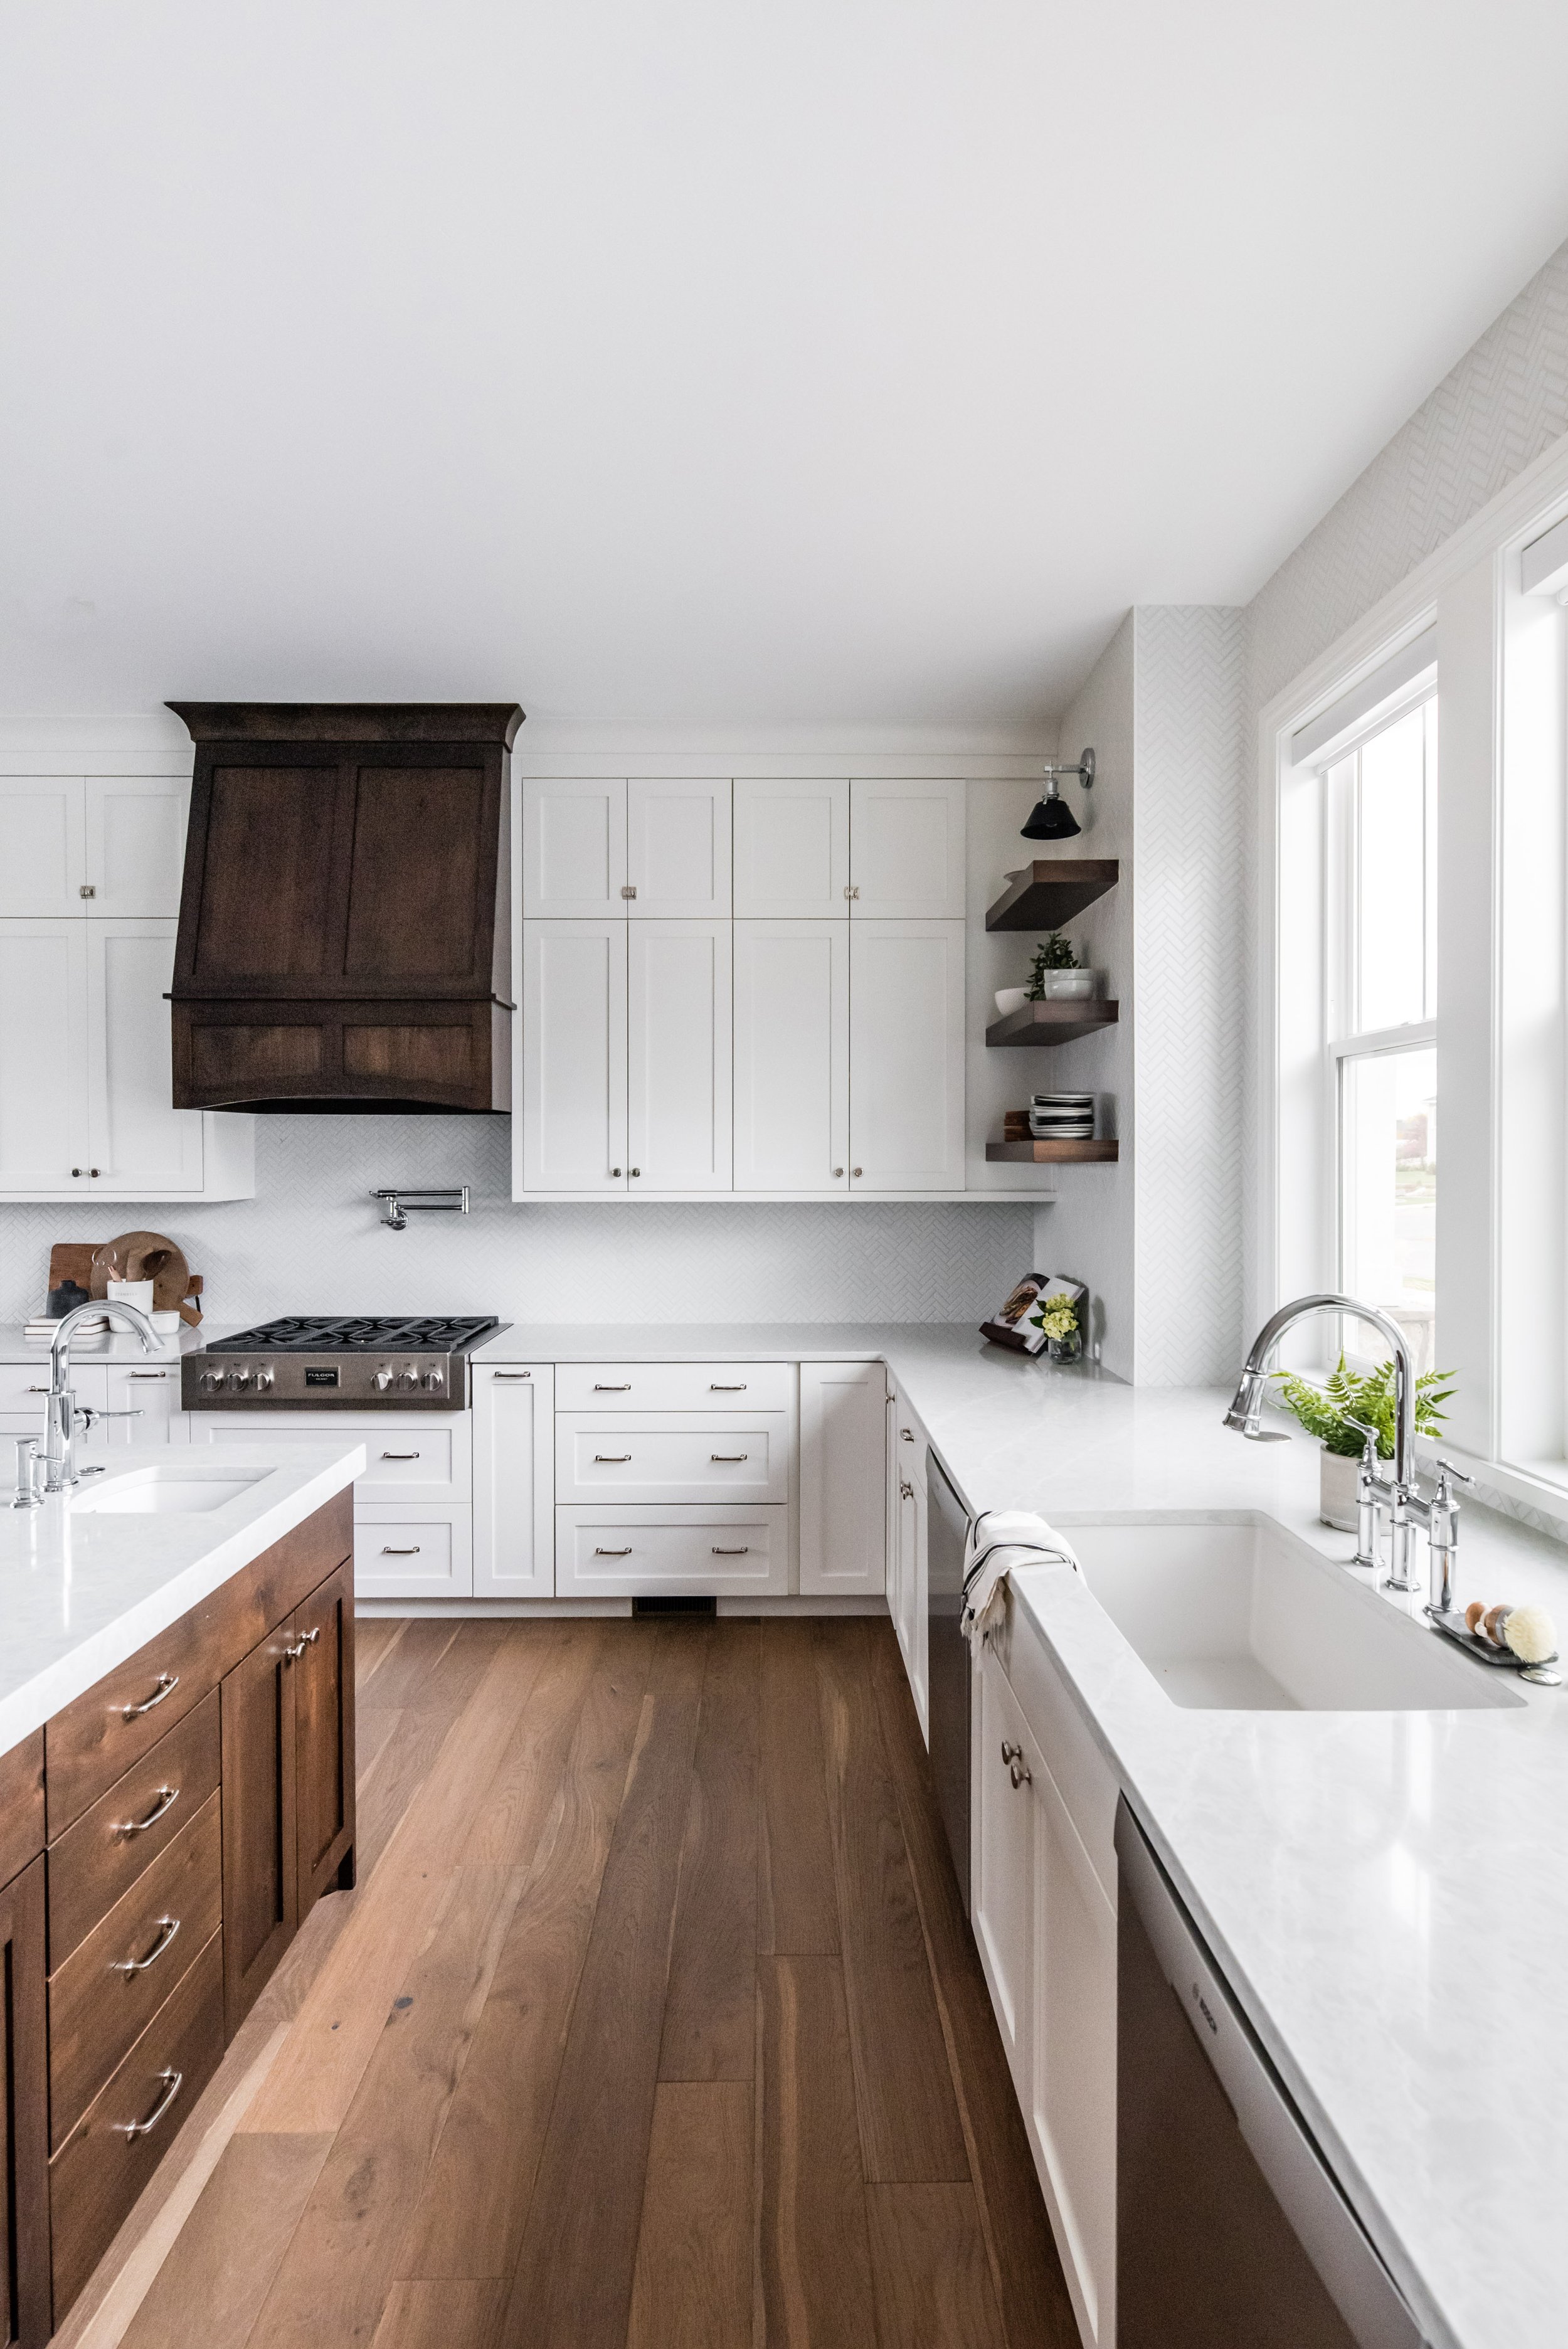  Please help me with all the decisions in my new build and how to pick out the right kitchen for me with Liz Powell Design. pick out kitchen of my dreams #LizPowellDesign #InteriorDesignUtah #InteriorDesigner #buildingahome #cabinetry #dreamhome #int